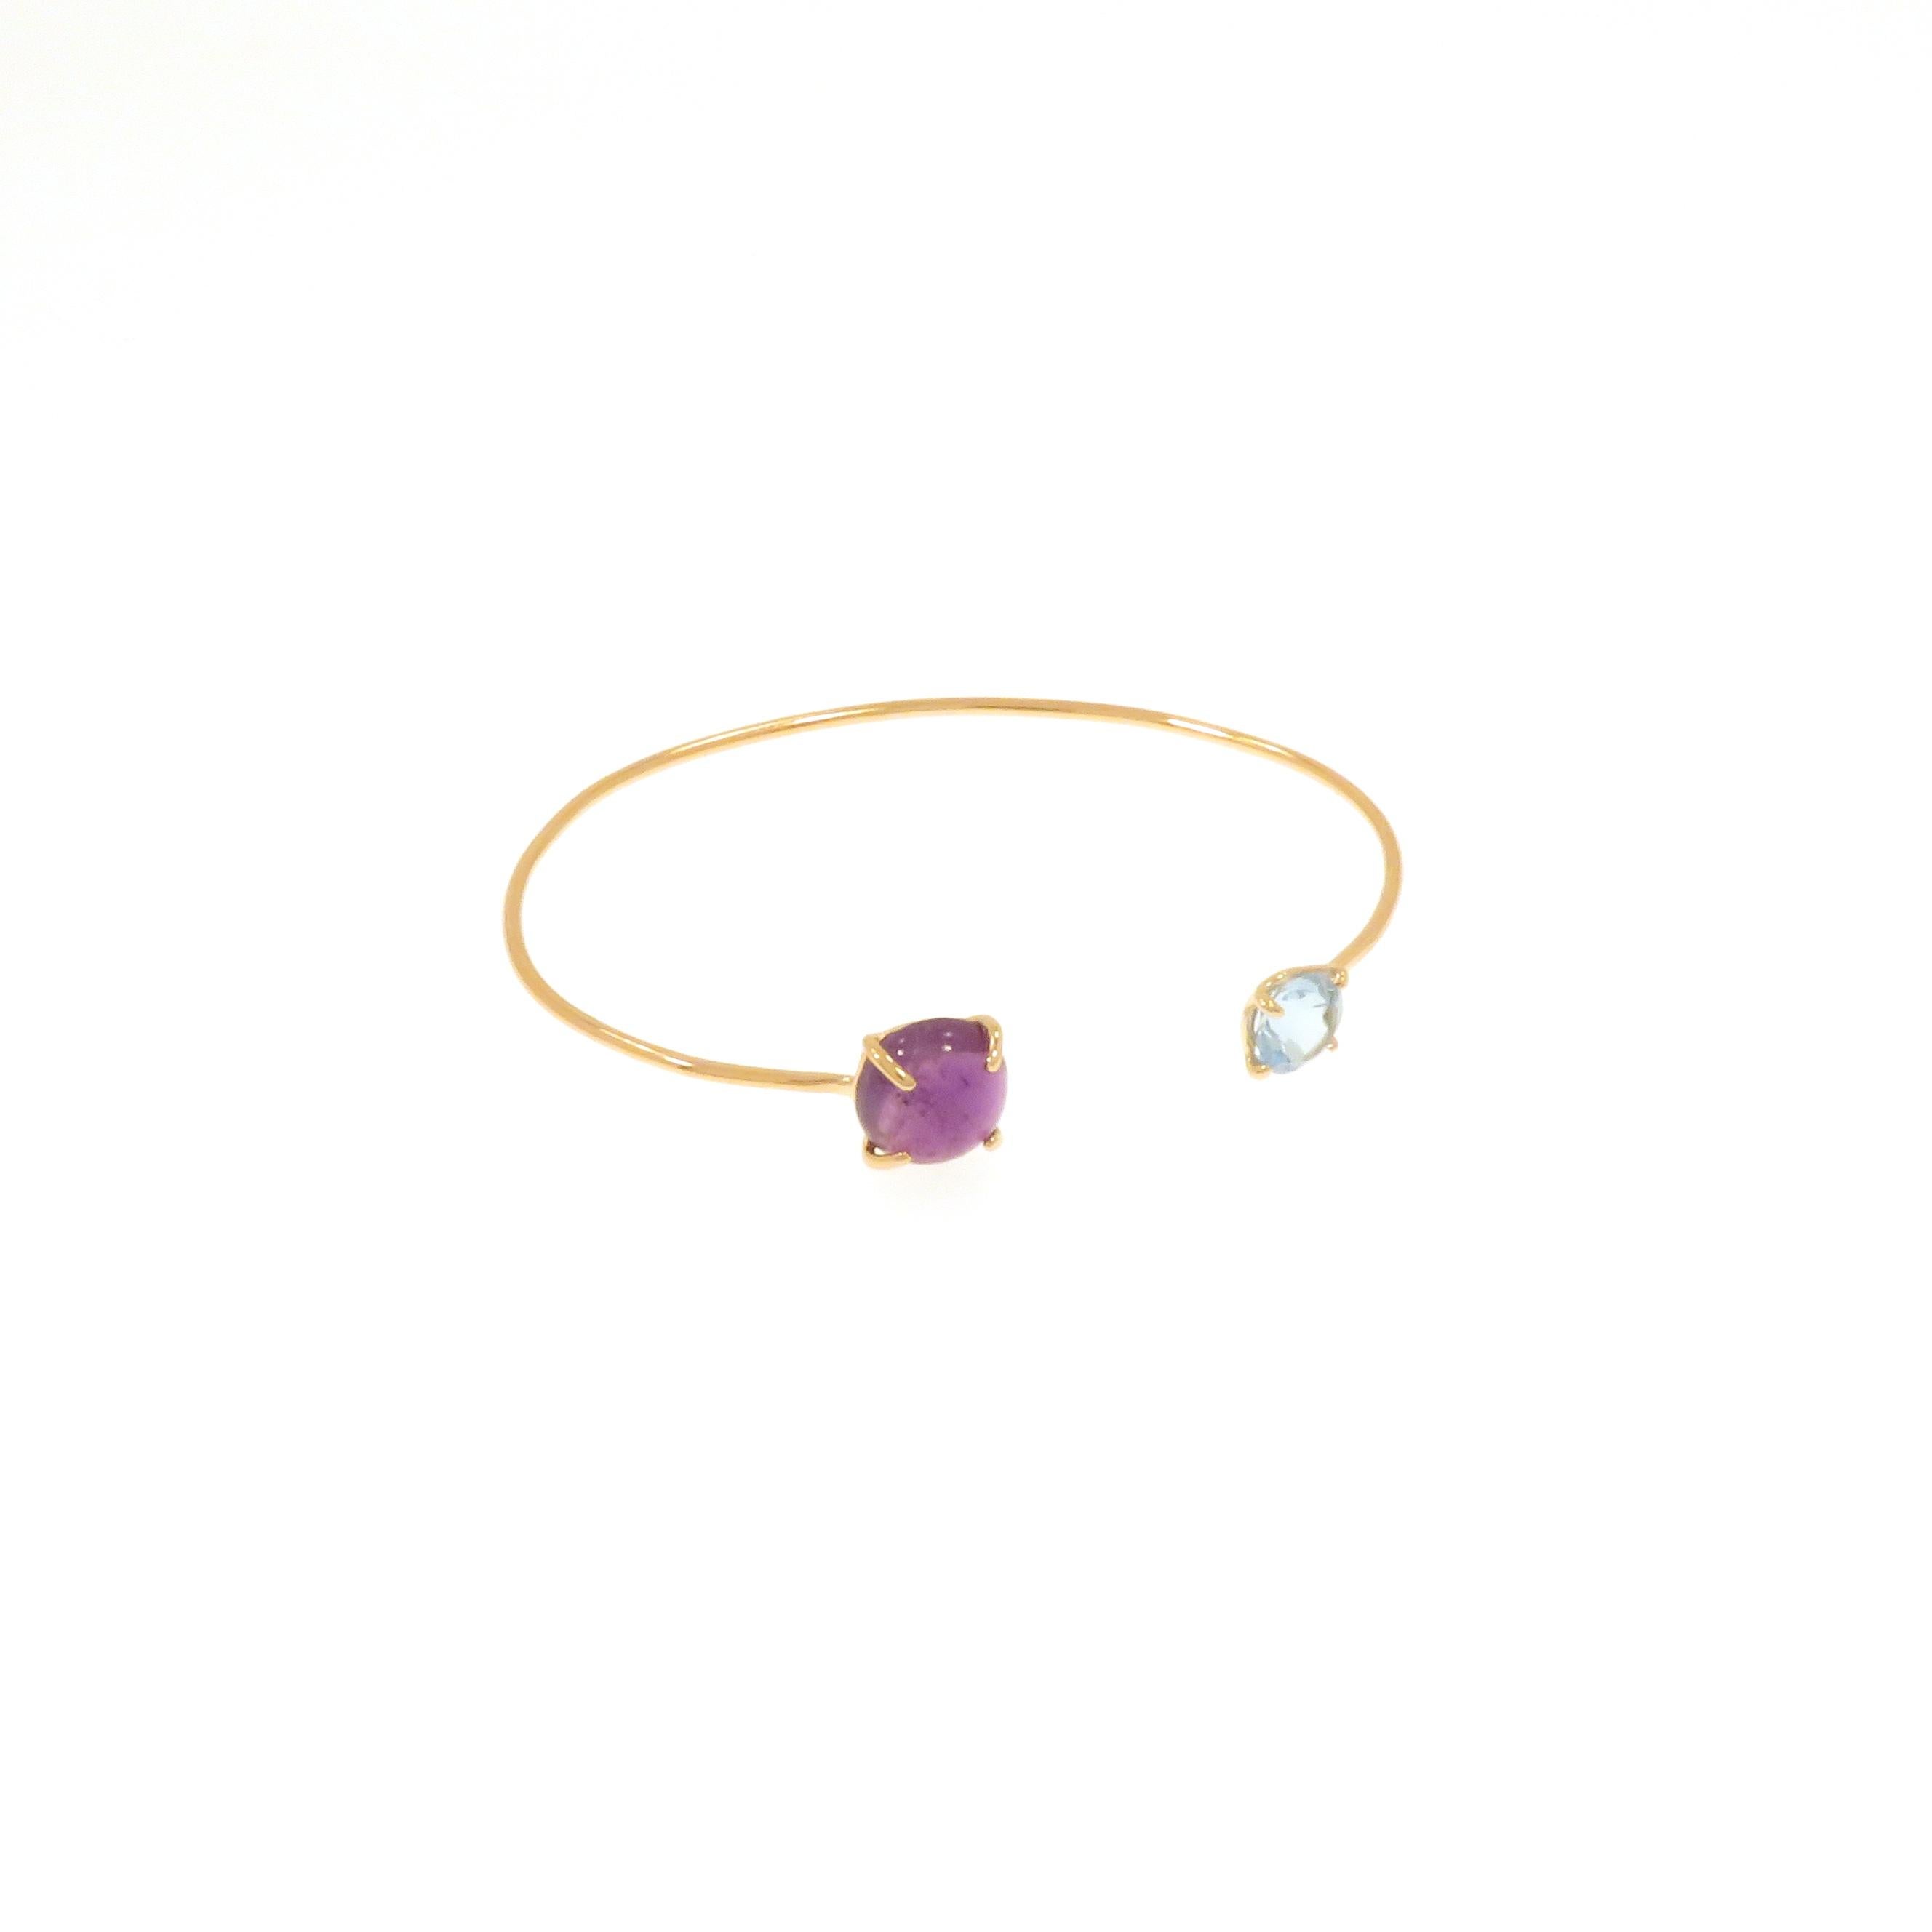 Contemporary Cuff Bracelet Blue Topaz Amethyst 9 Karat Rose Gold Handcrafted in Italy For Sale